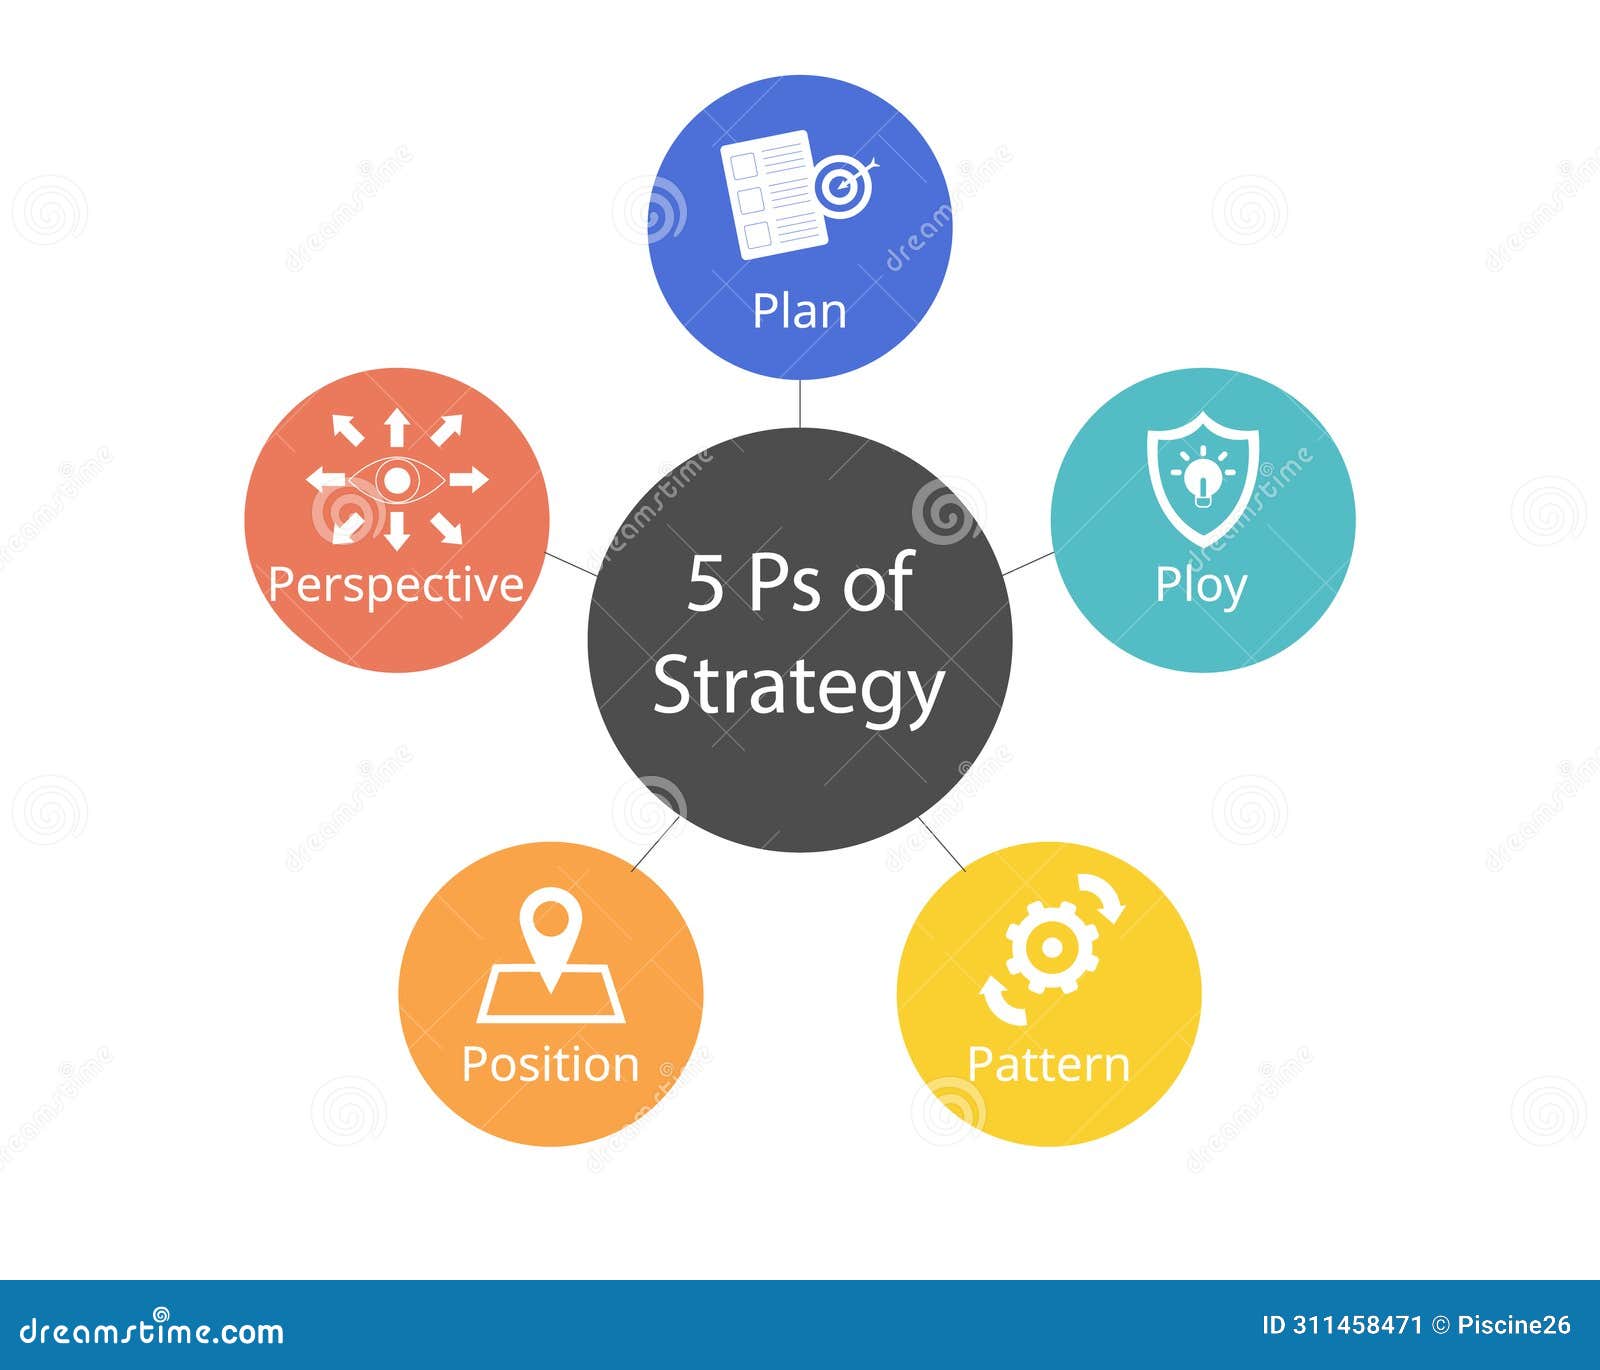 the 5 ps of strategy for business planning for plan, ploy, pattern, position, perspective